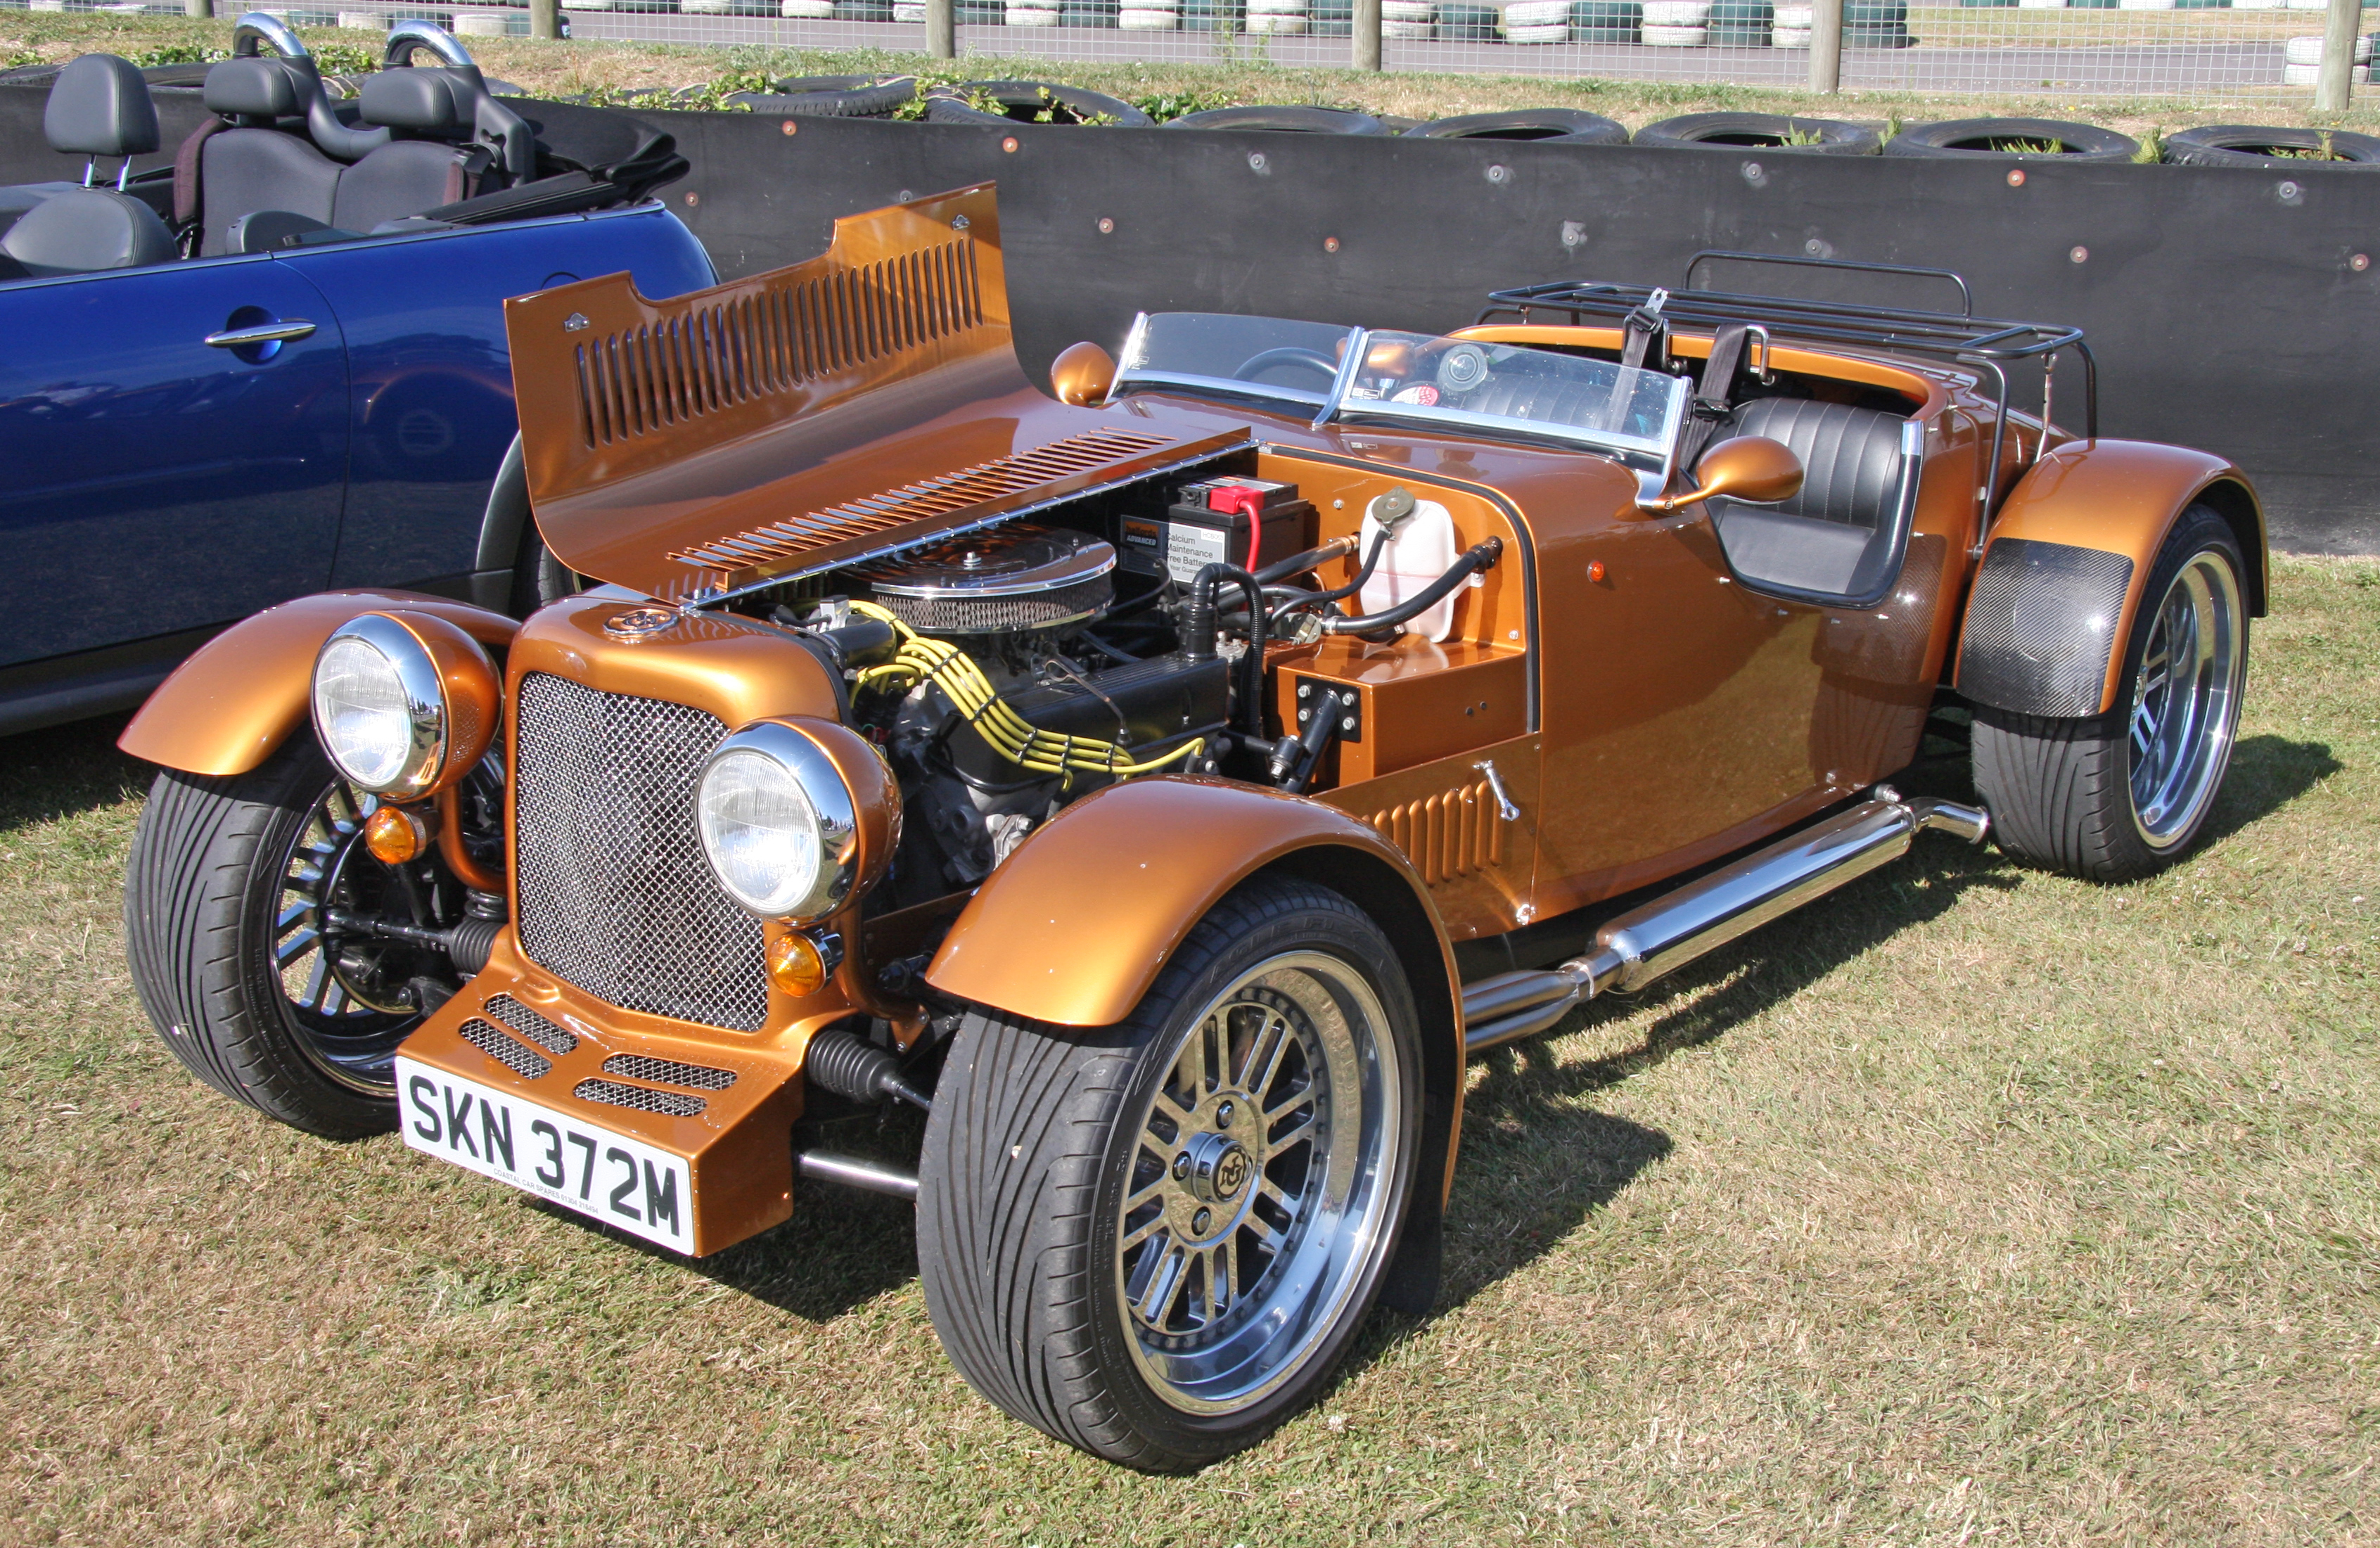 Kit Cars Photos.Kit Cars To Build Yourself In Usa